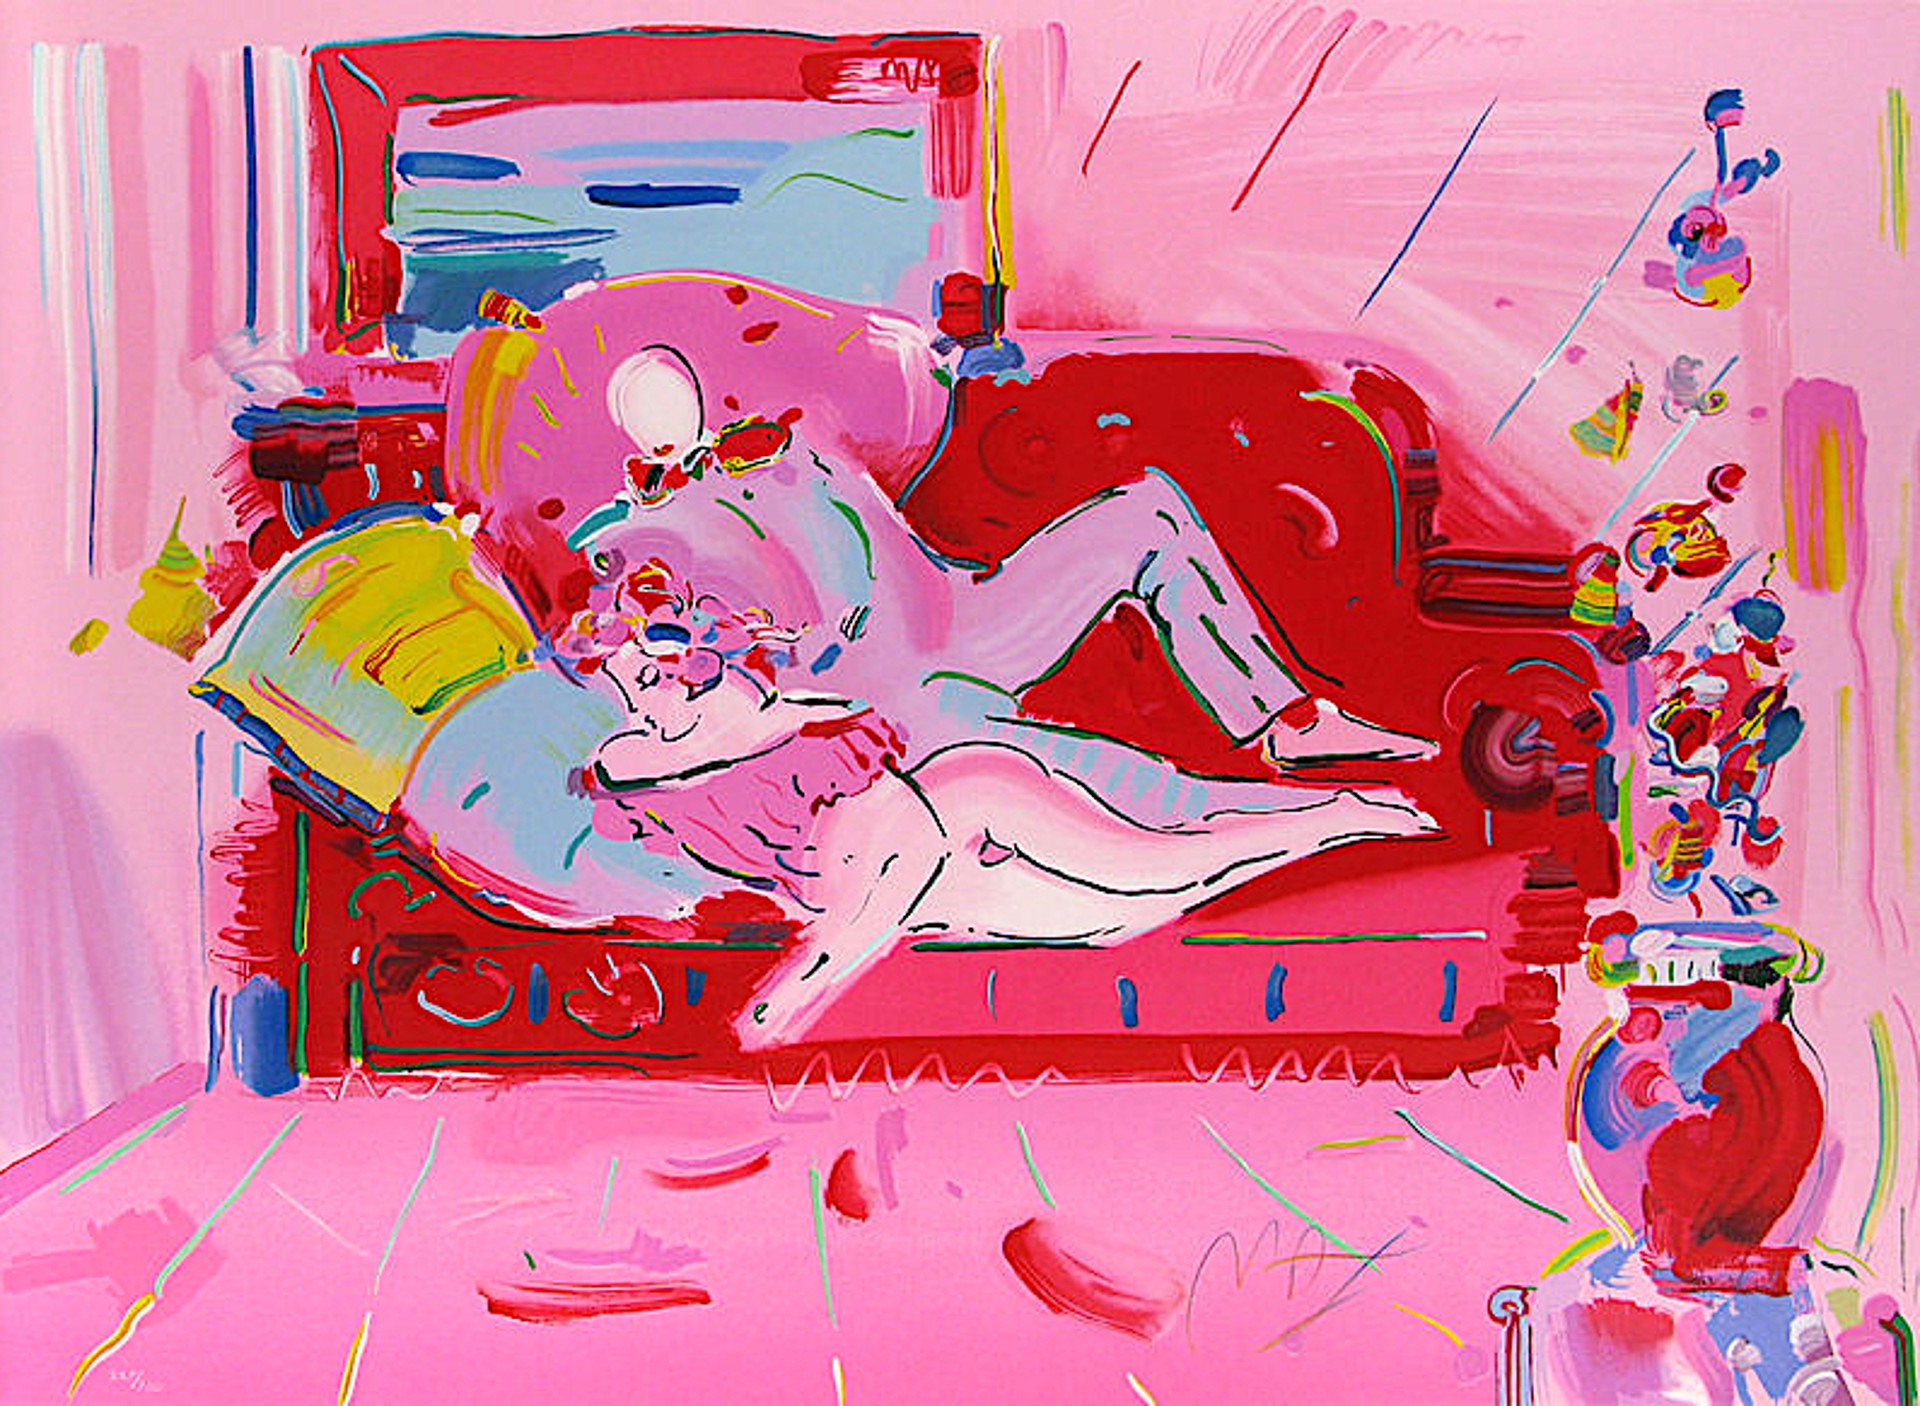 Dega with Lady by Peter Max